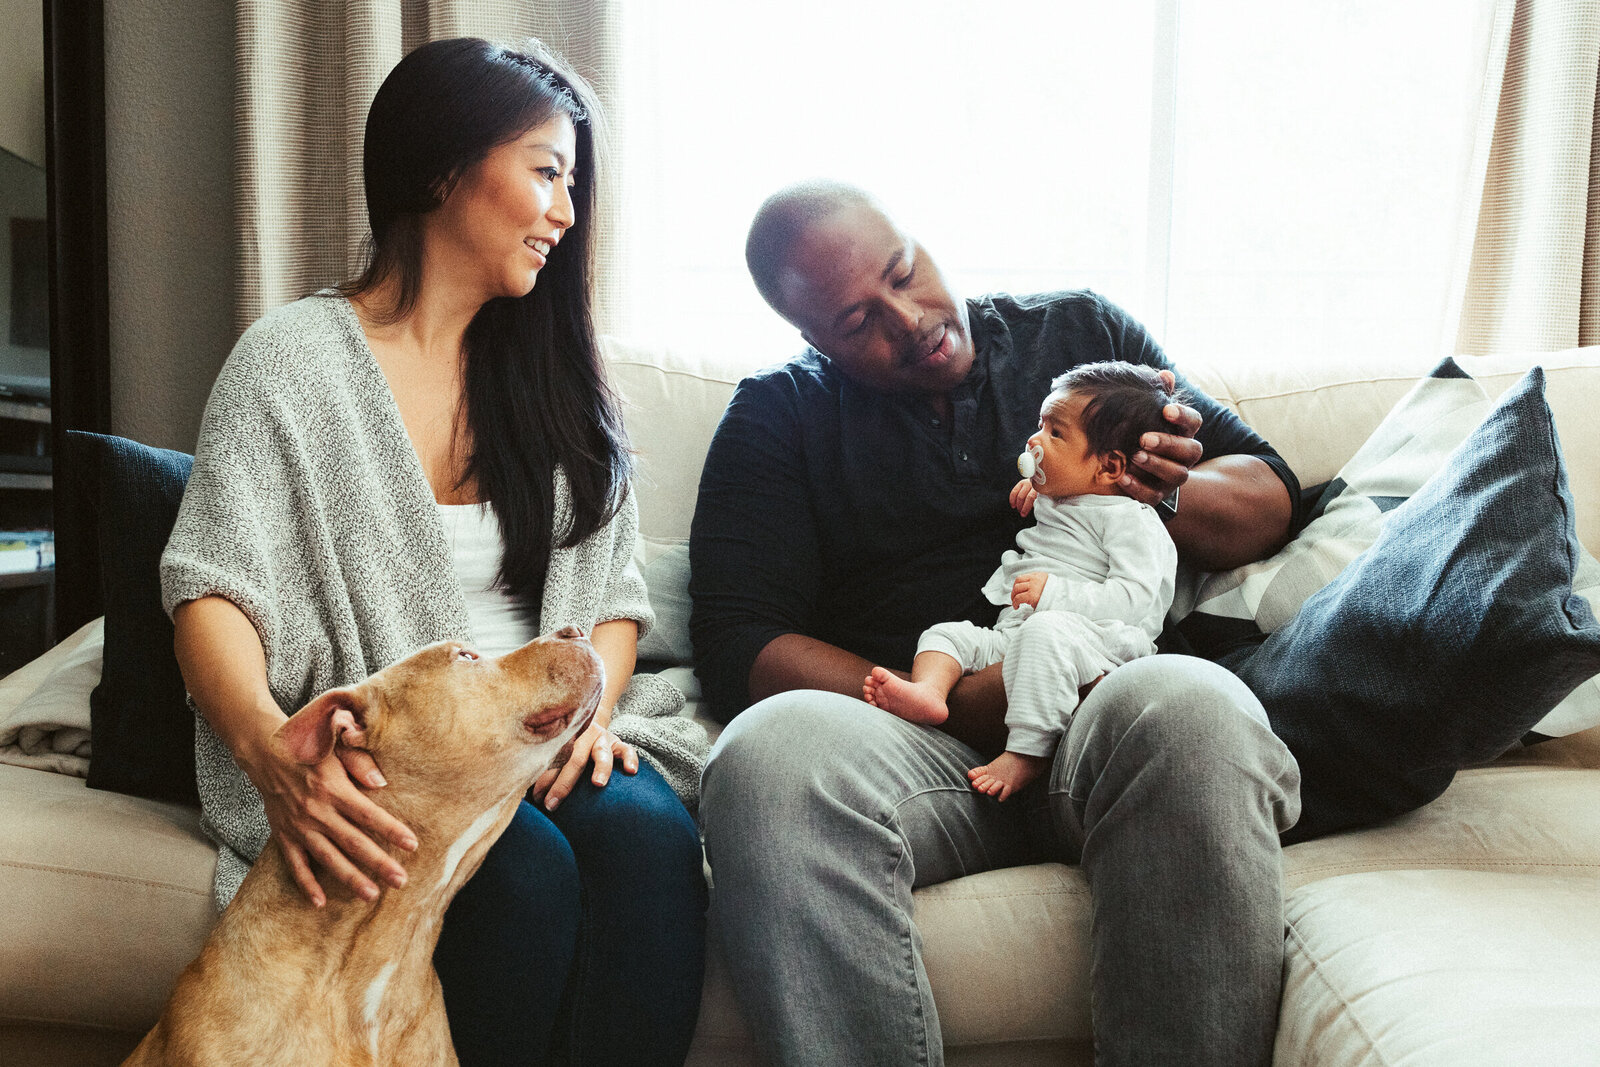 Asian mom and Black dad sitting in their living room holding their newborn baby boy while their dog looks on